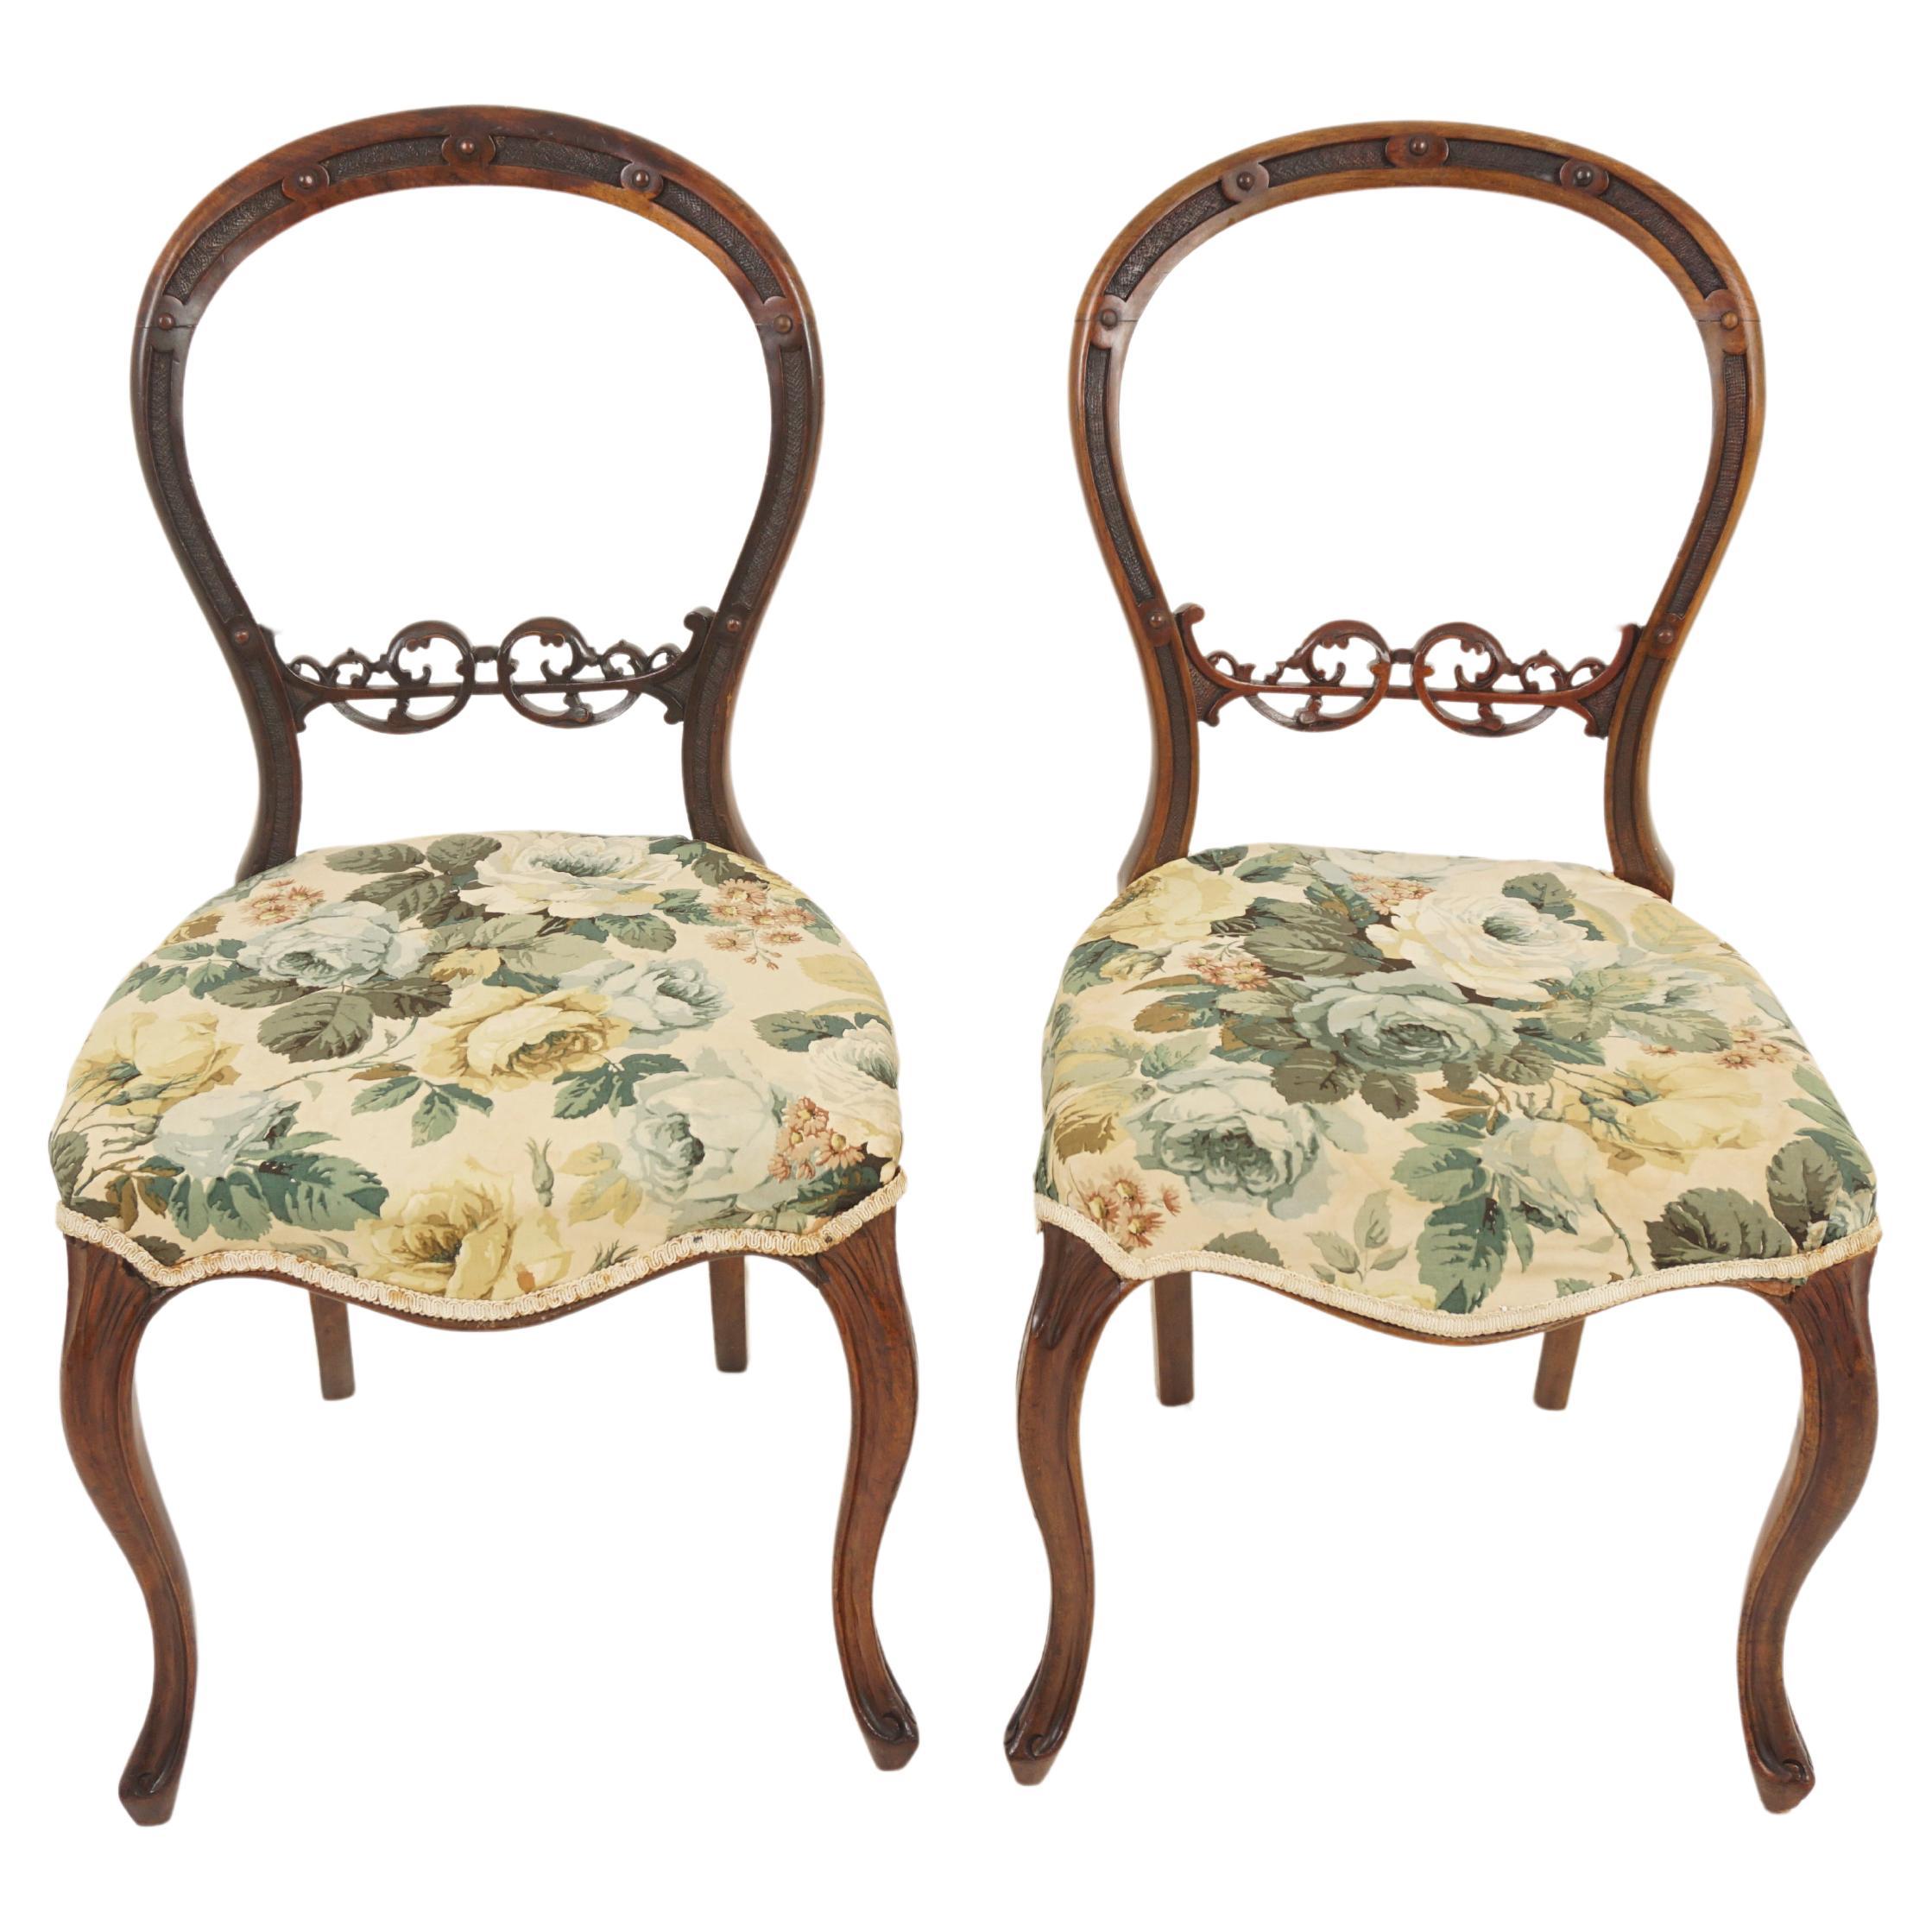 Pair Of Victorian Carved Walnut Balloon Back Chairs, Scotland 1880, H1164